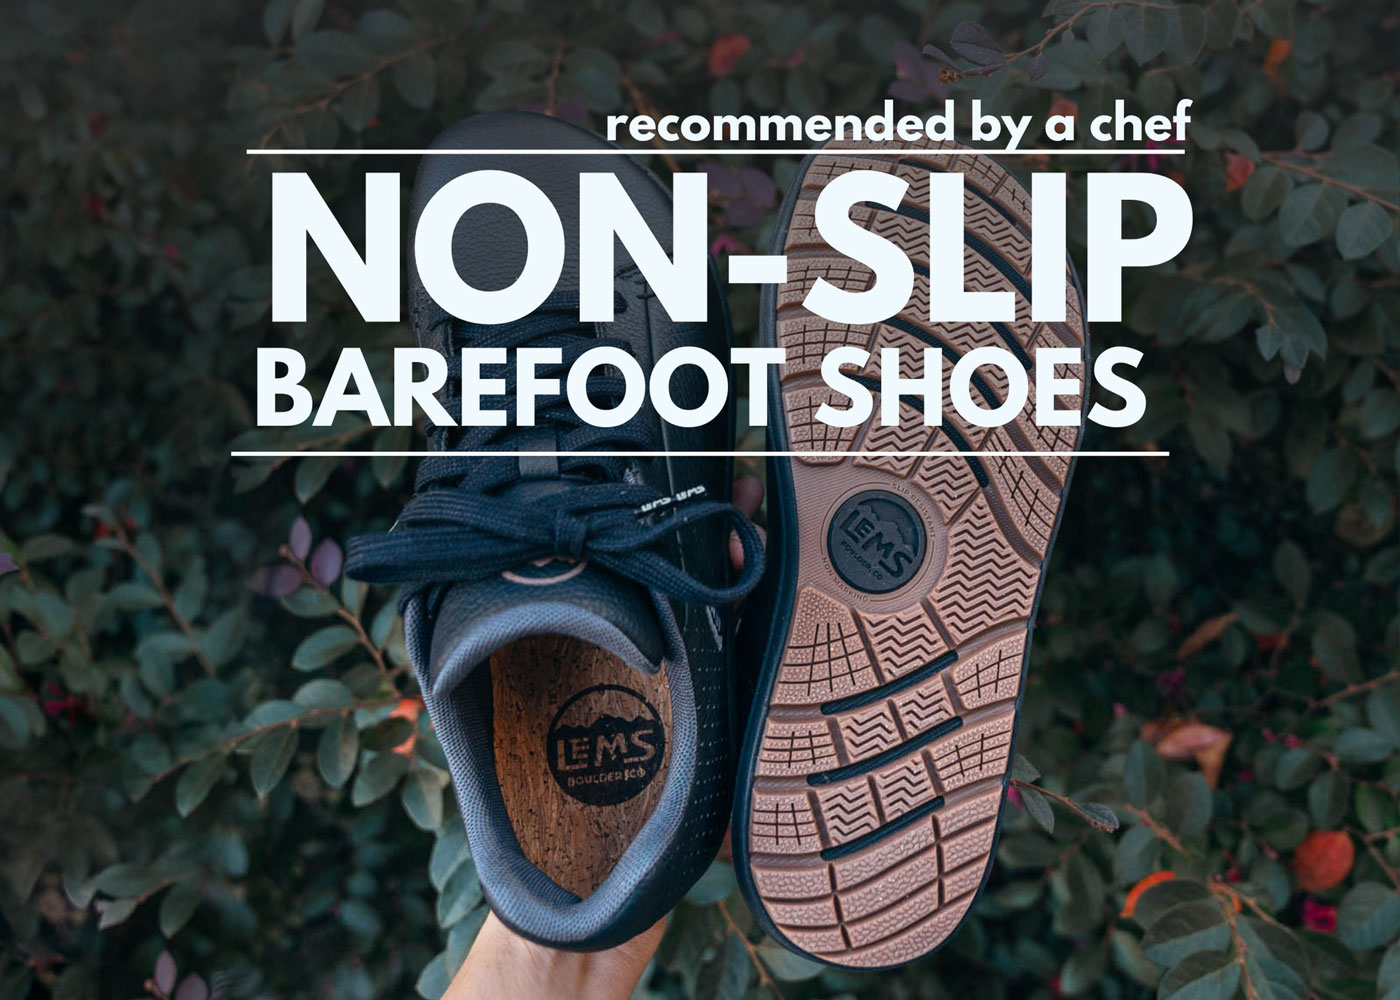 Best Non-Slip Barefoot Shoes for Restaurant Workers—Tested by a Chef